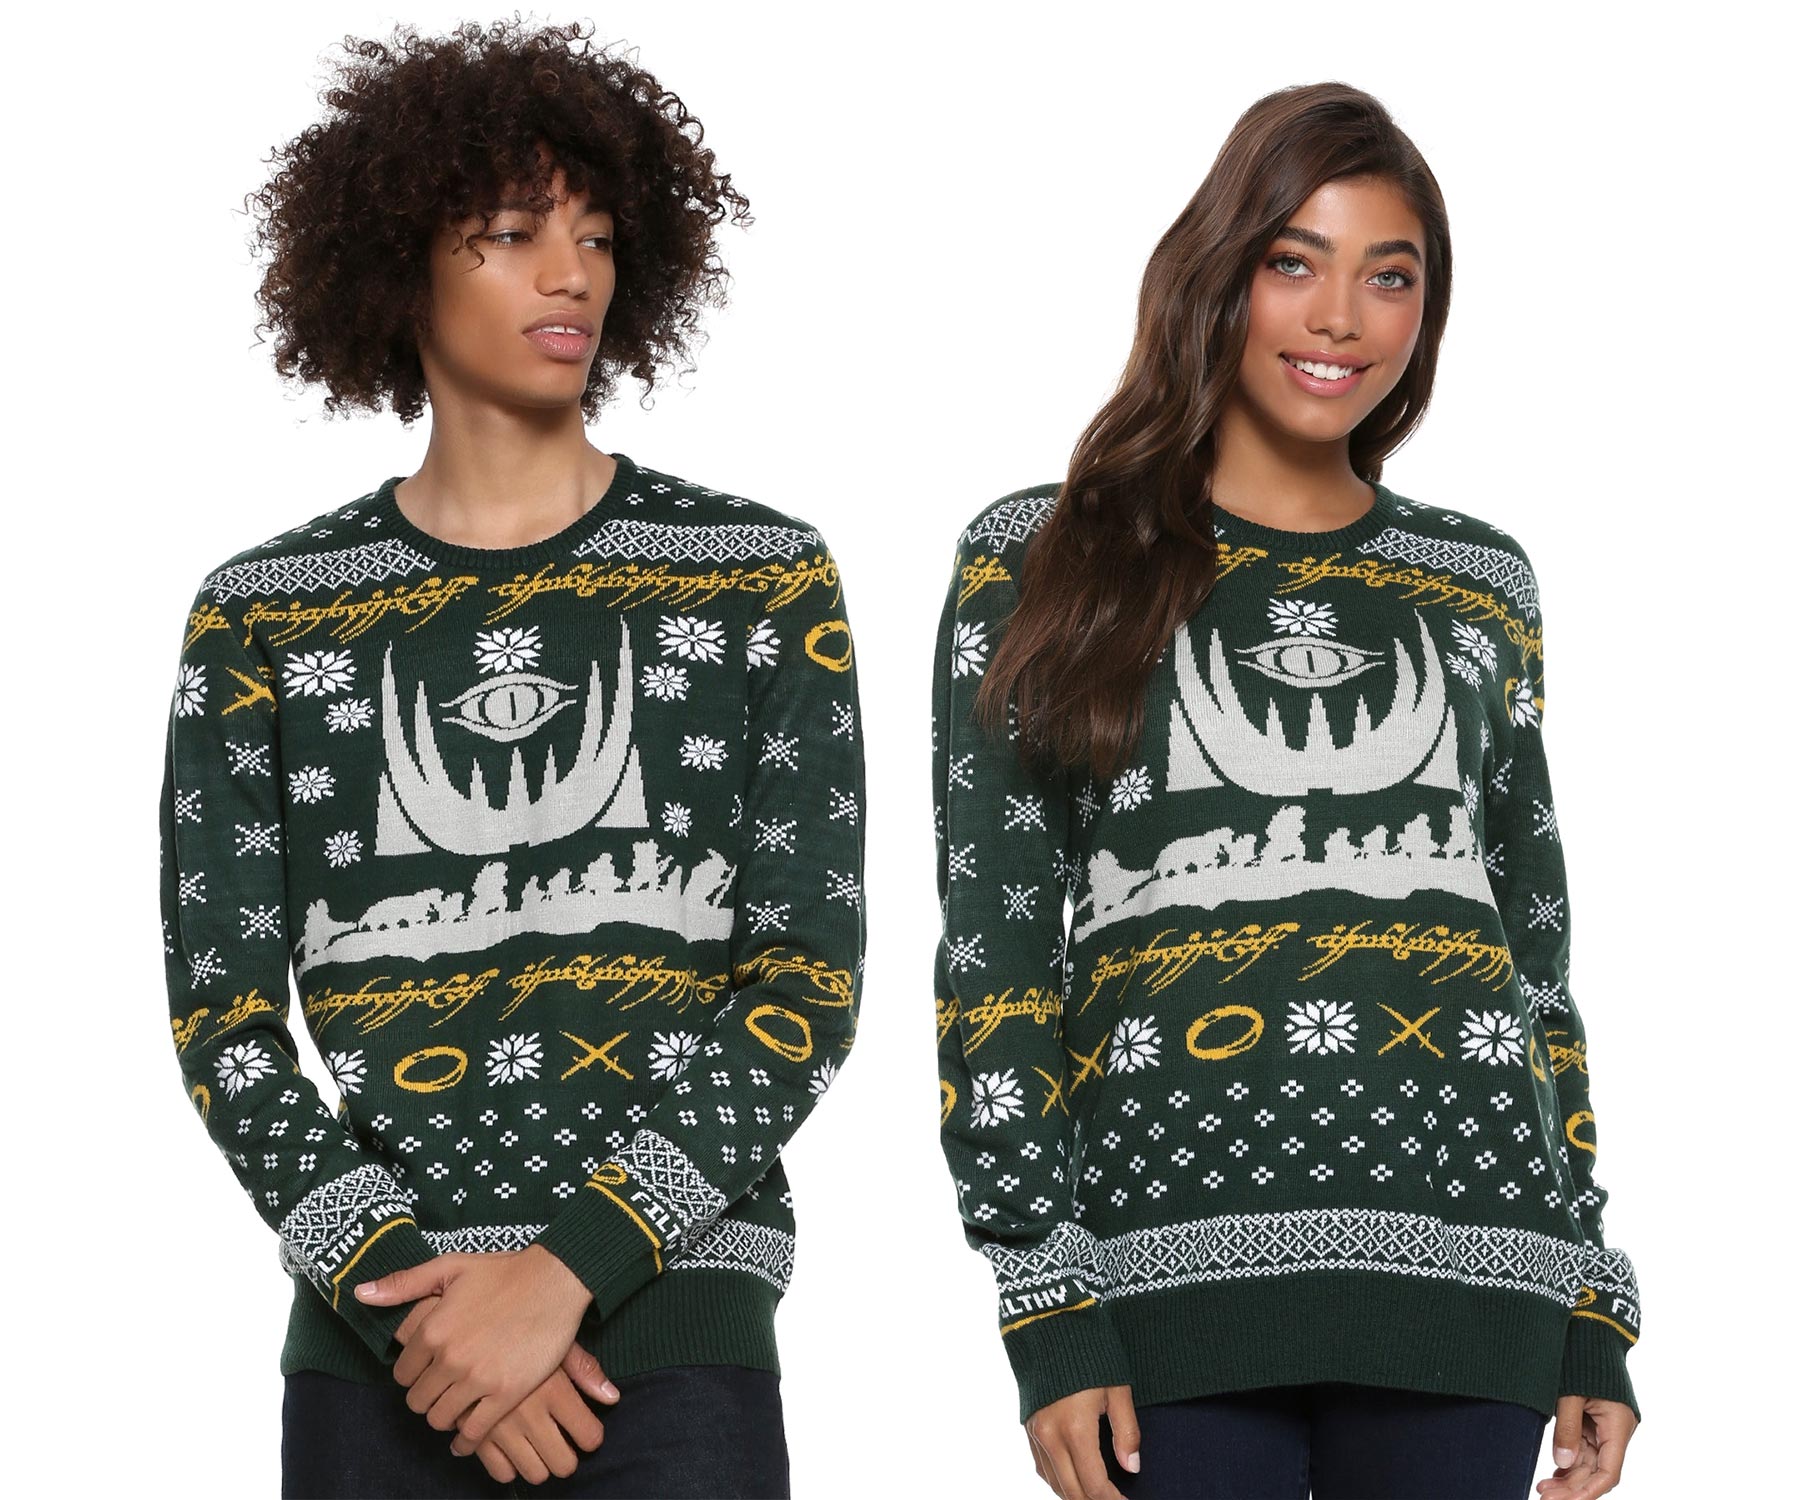 The Lord Of The Rings Christmas Sweater